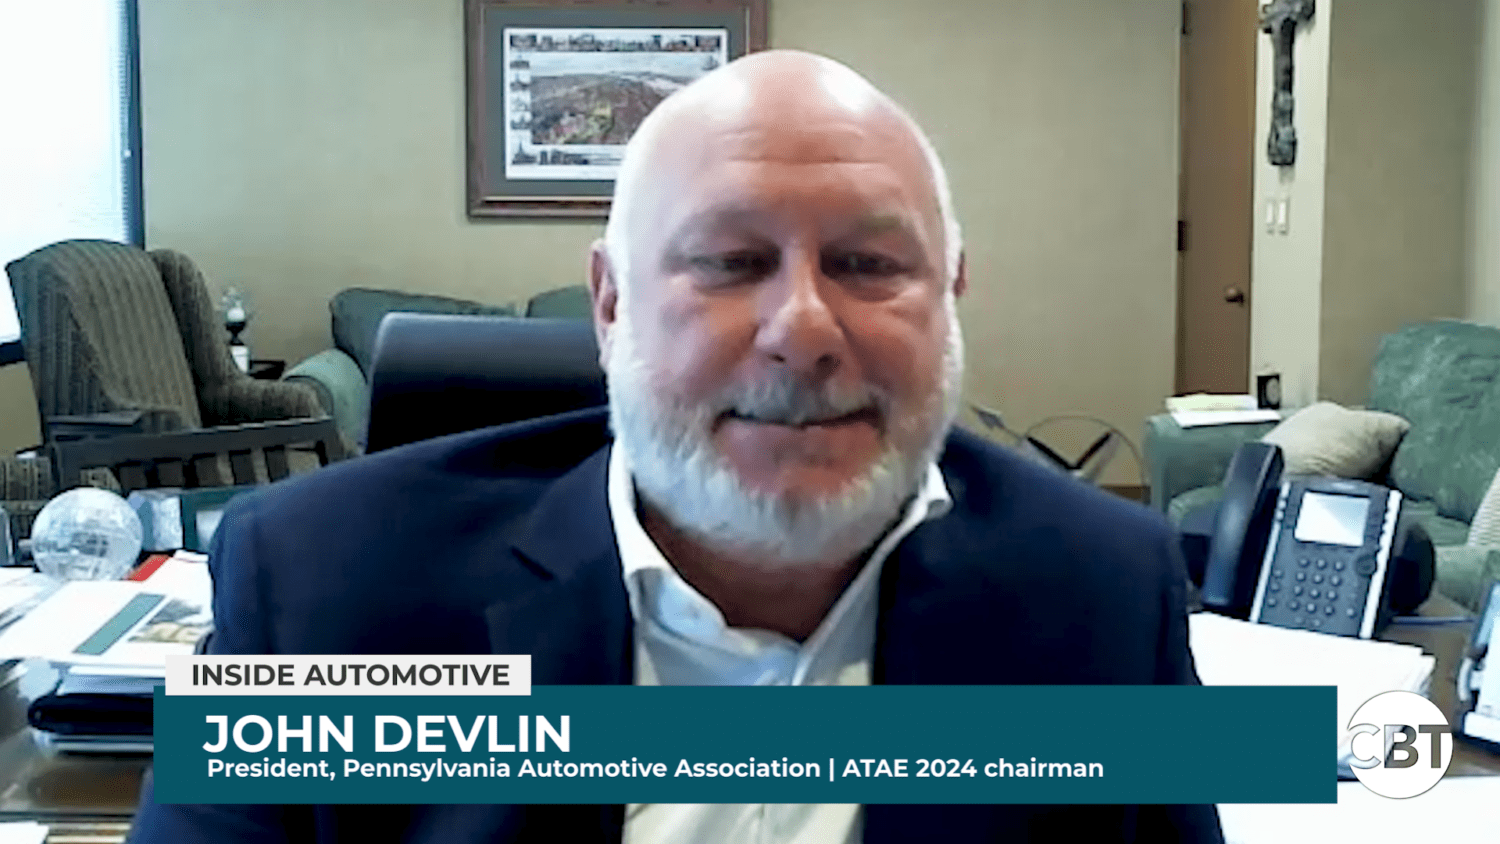 John Devlin joins Inside Automotive to discuss the critical role the franchise model plays in driving sales and serving consumers.